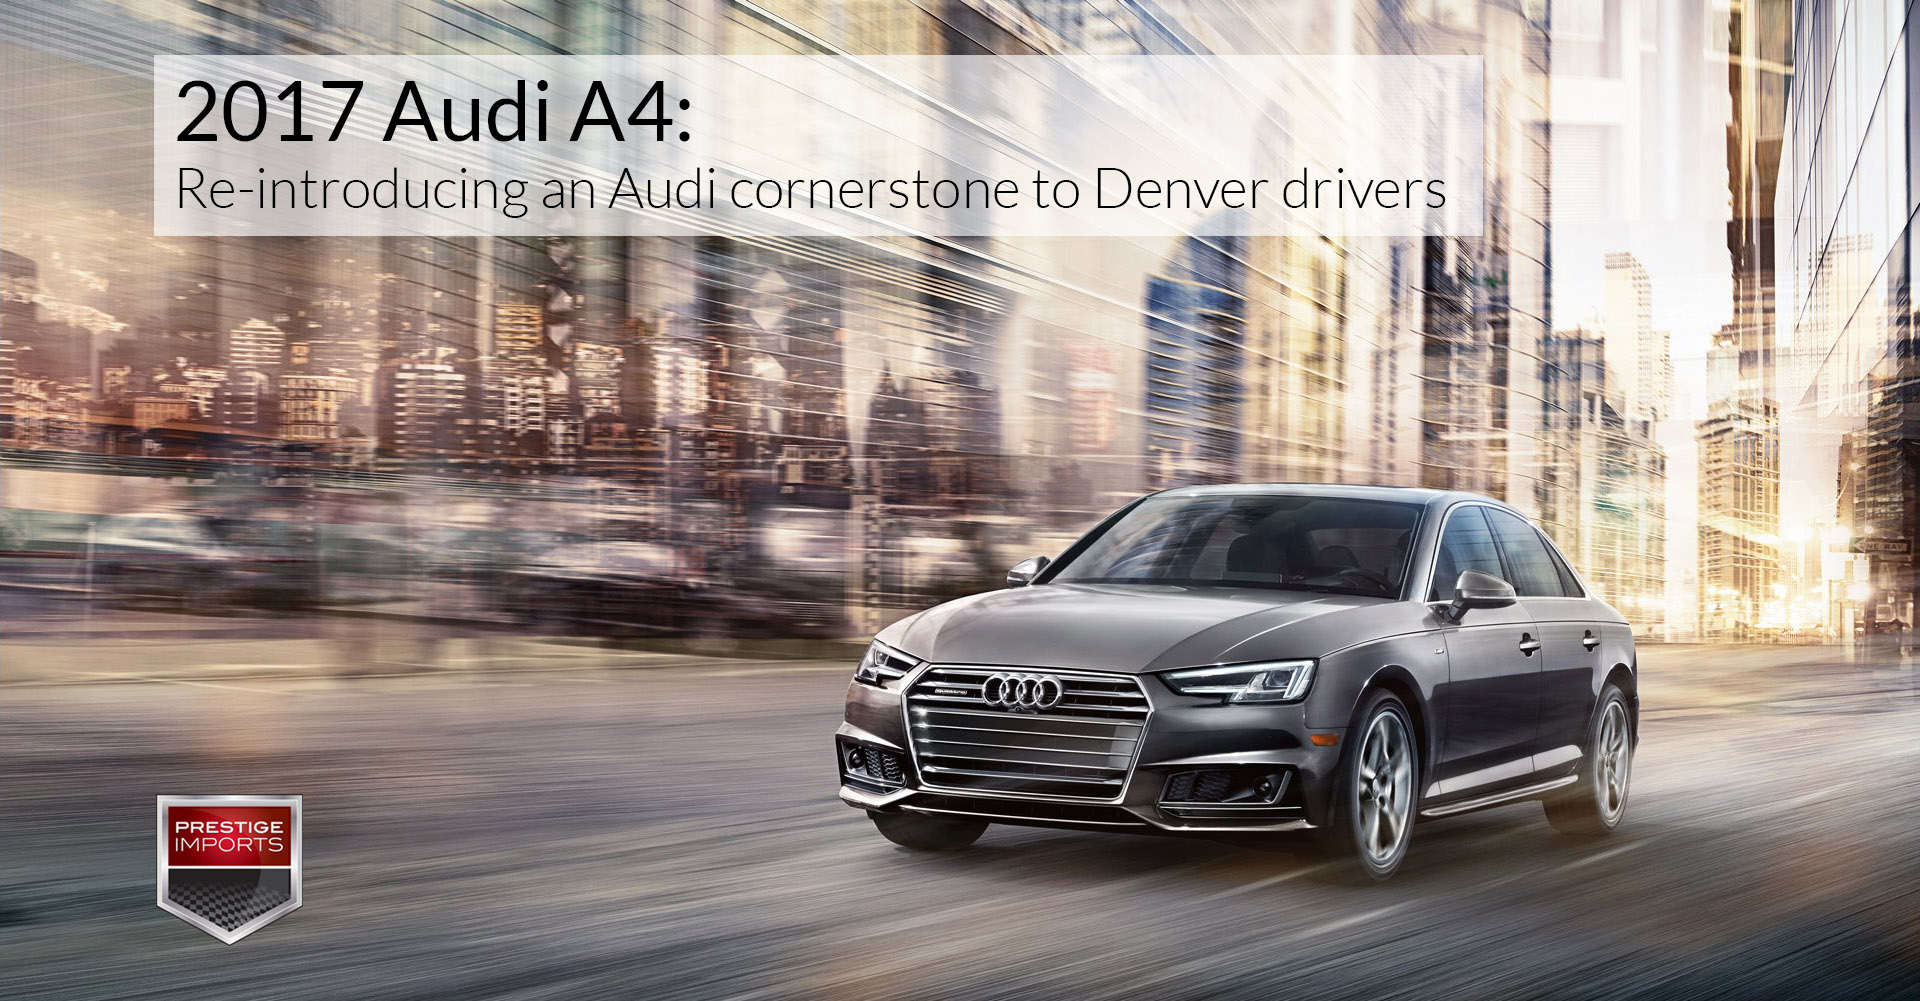 Photo of the all-new 2017 Audi A4 driving on a city street. Used to illustrate the article "2017 Audi A4 - Re-introducing an Audi cornerstone to Denver drivers".